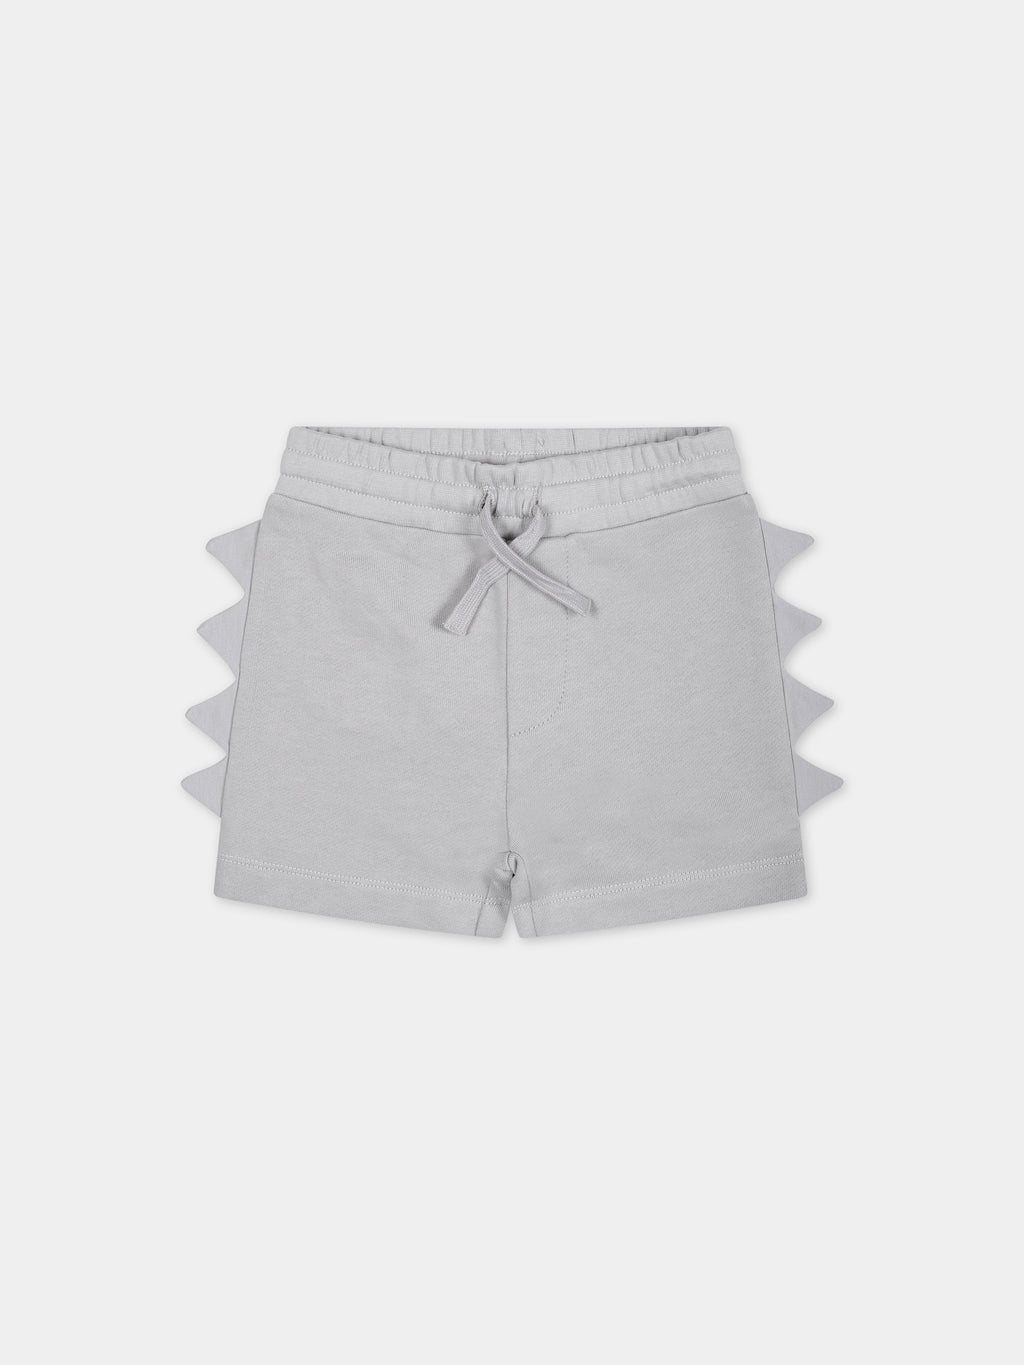 Gray shorts for babies